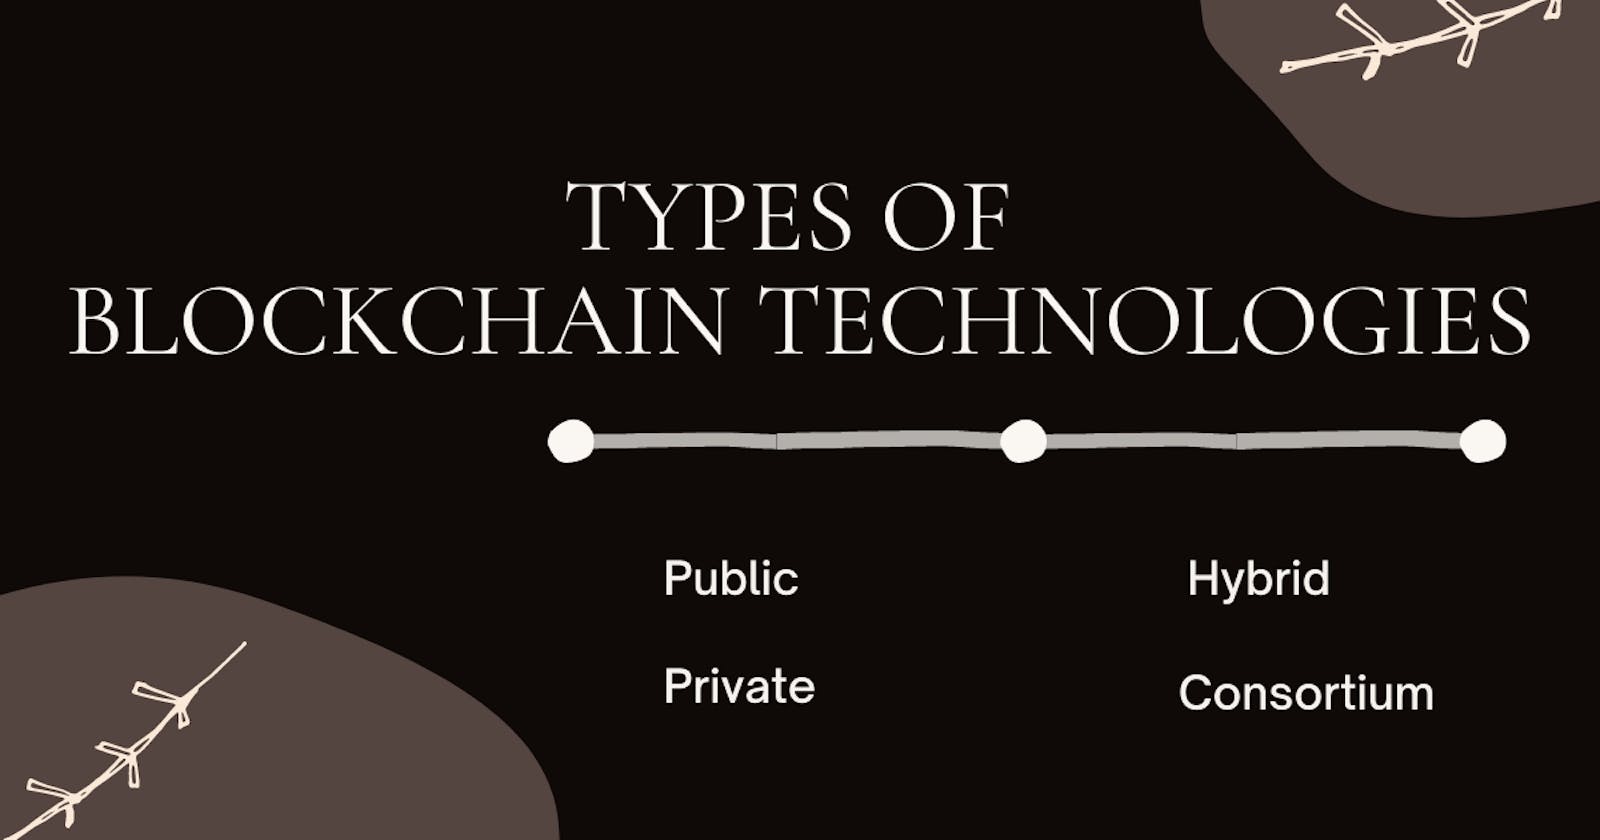 What are different Types of Blockchain Technologies?